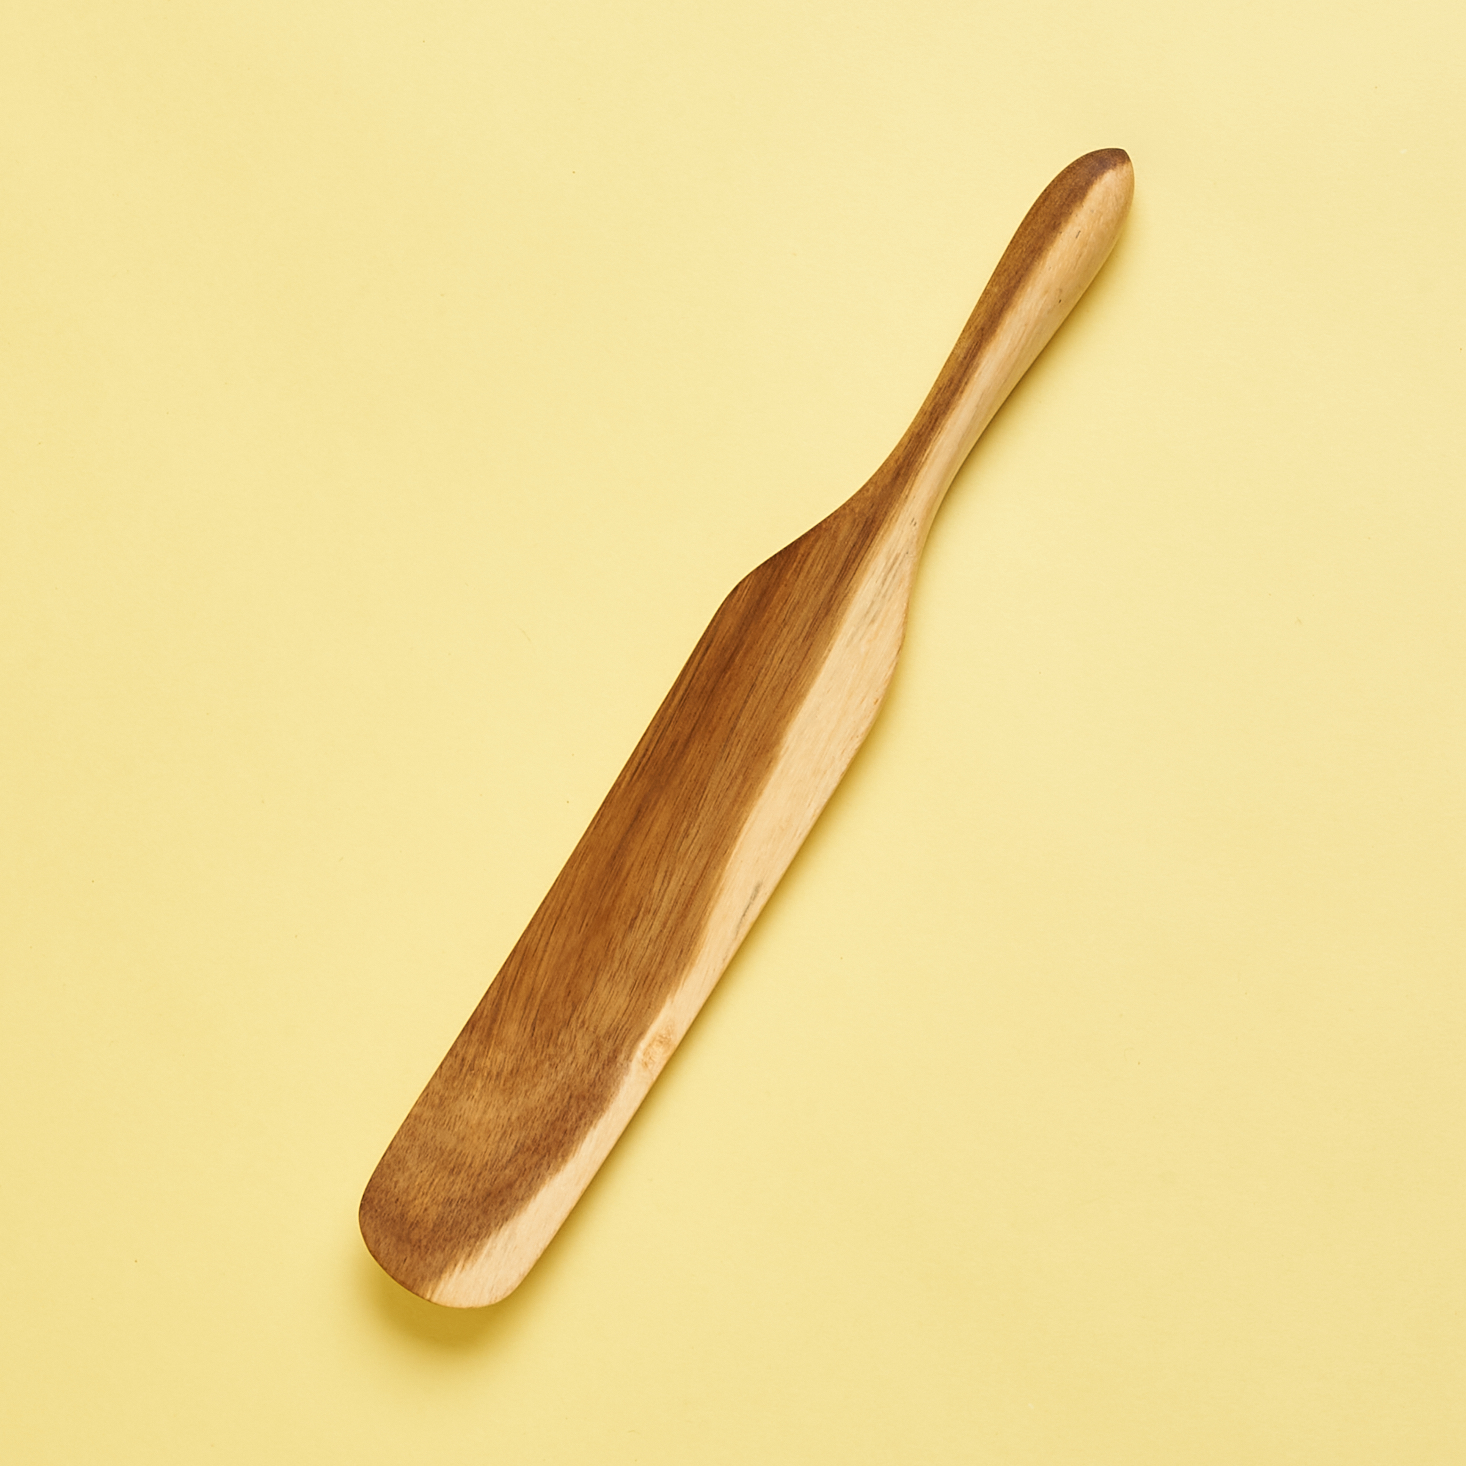 A wooden spurtle, a cross between a spatula and a spoon